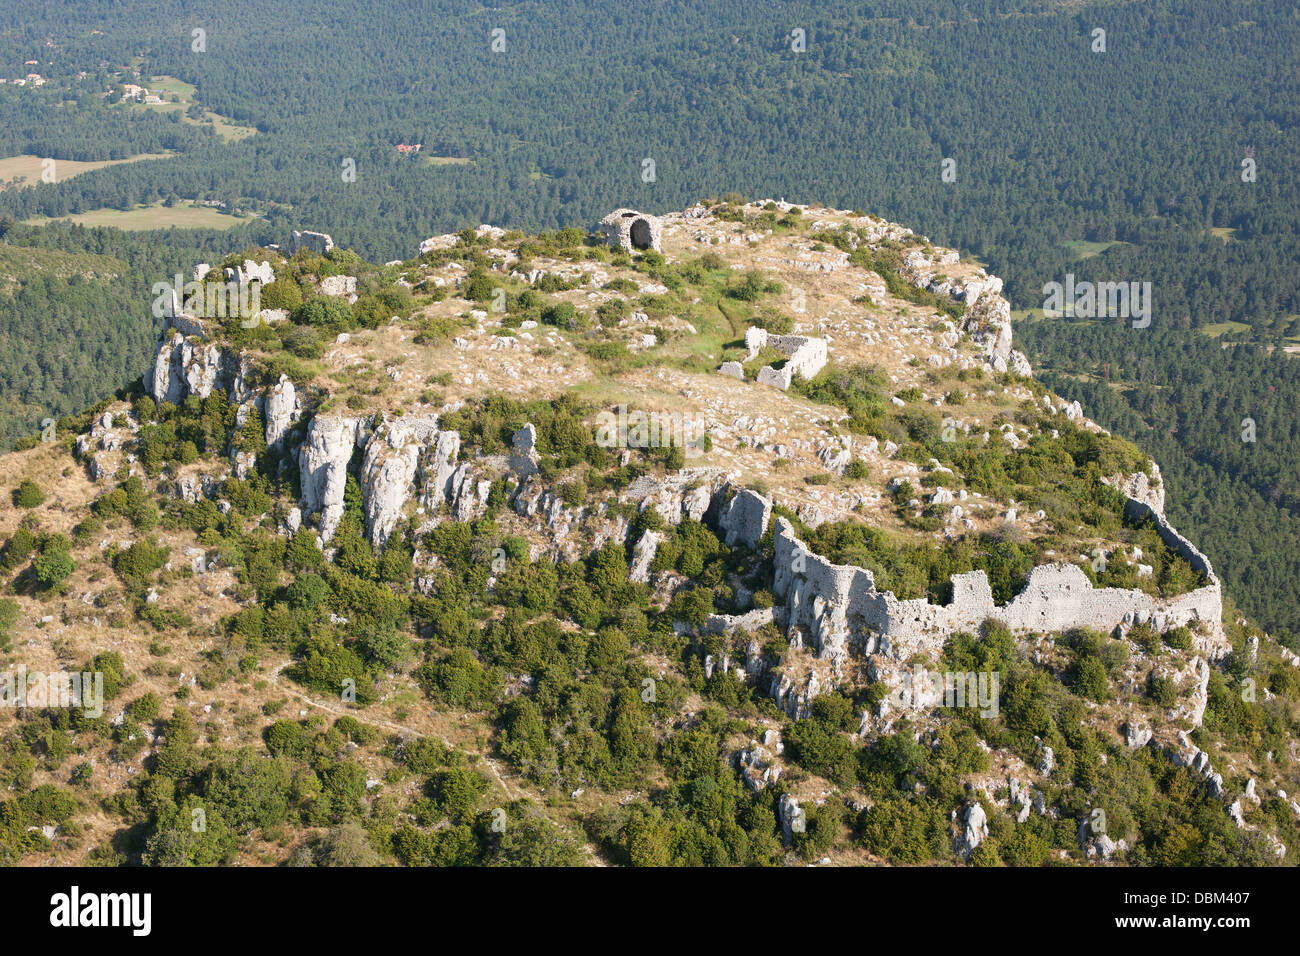 AERIAL VIEW. Ruins of an ancient settlement on a flat-top mountain. Castellaras of Thorenc, Alpes-Maritimes, French Riviera's hinterland, France. Stock Photo